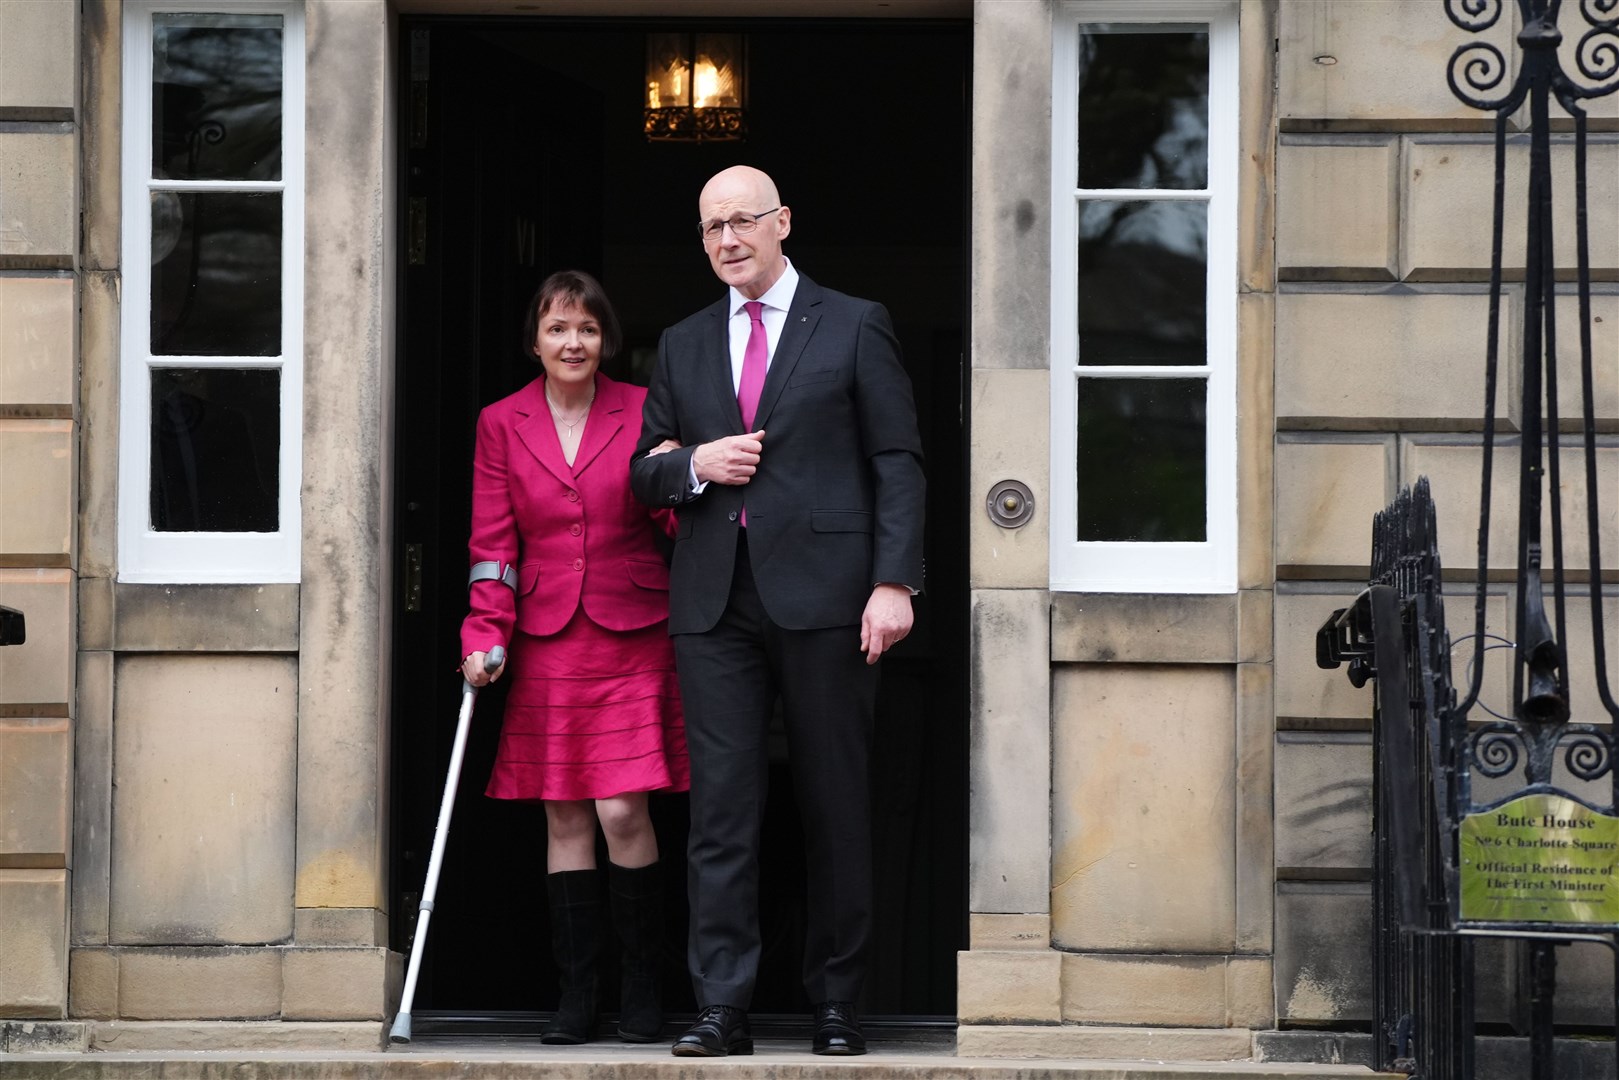 John Swinney, with his wife Elizabeth Quigley, on the steps of Bute House, the official residence of the First Minister (Andrew Milligan/PA)